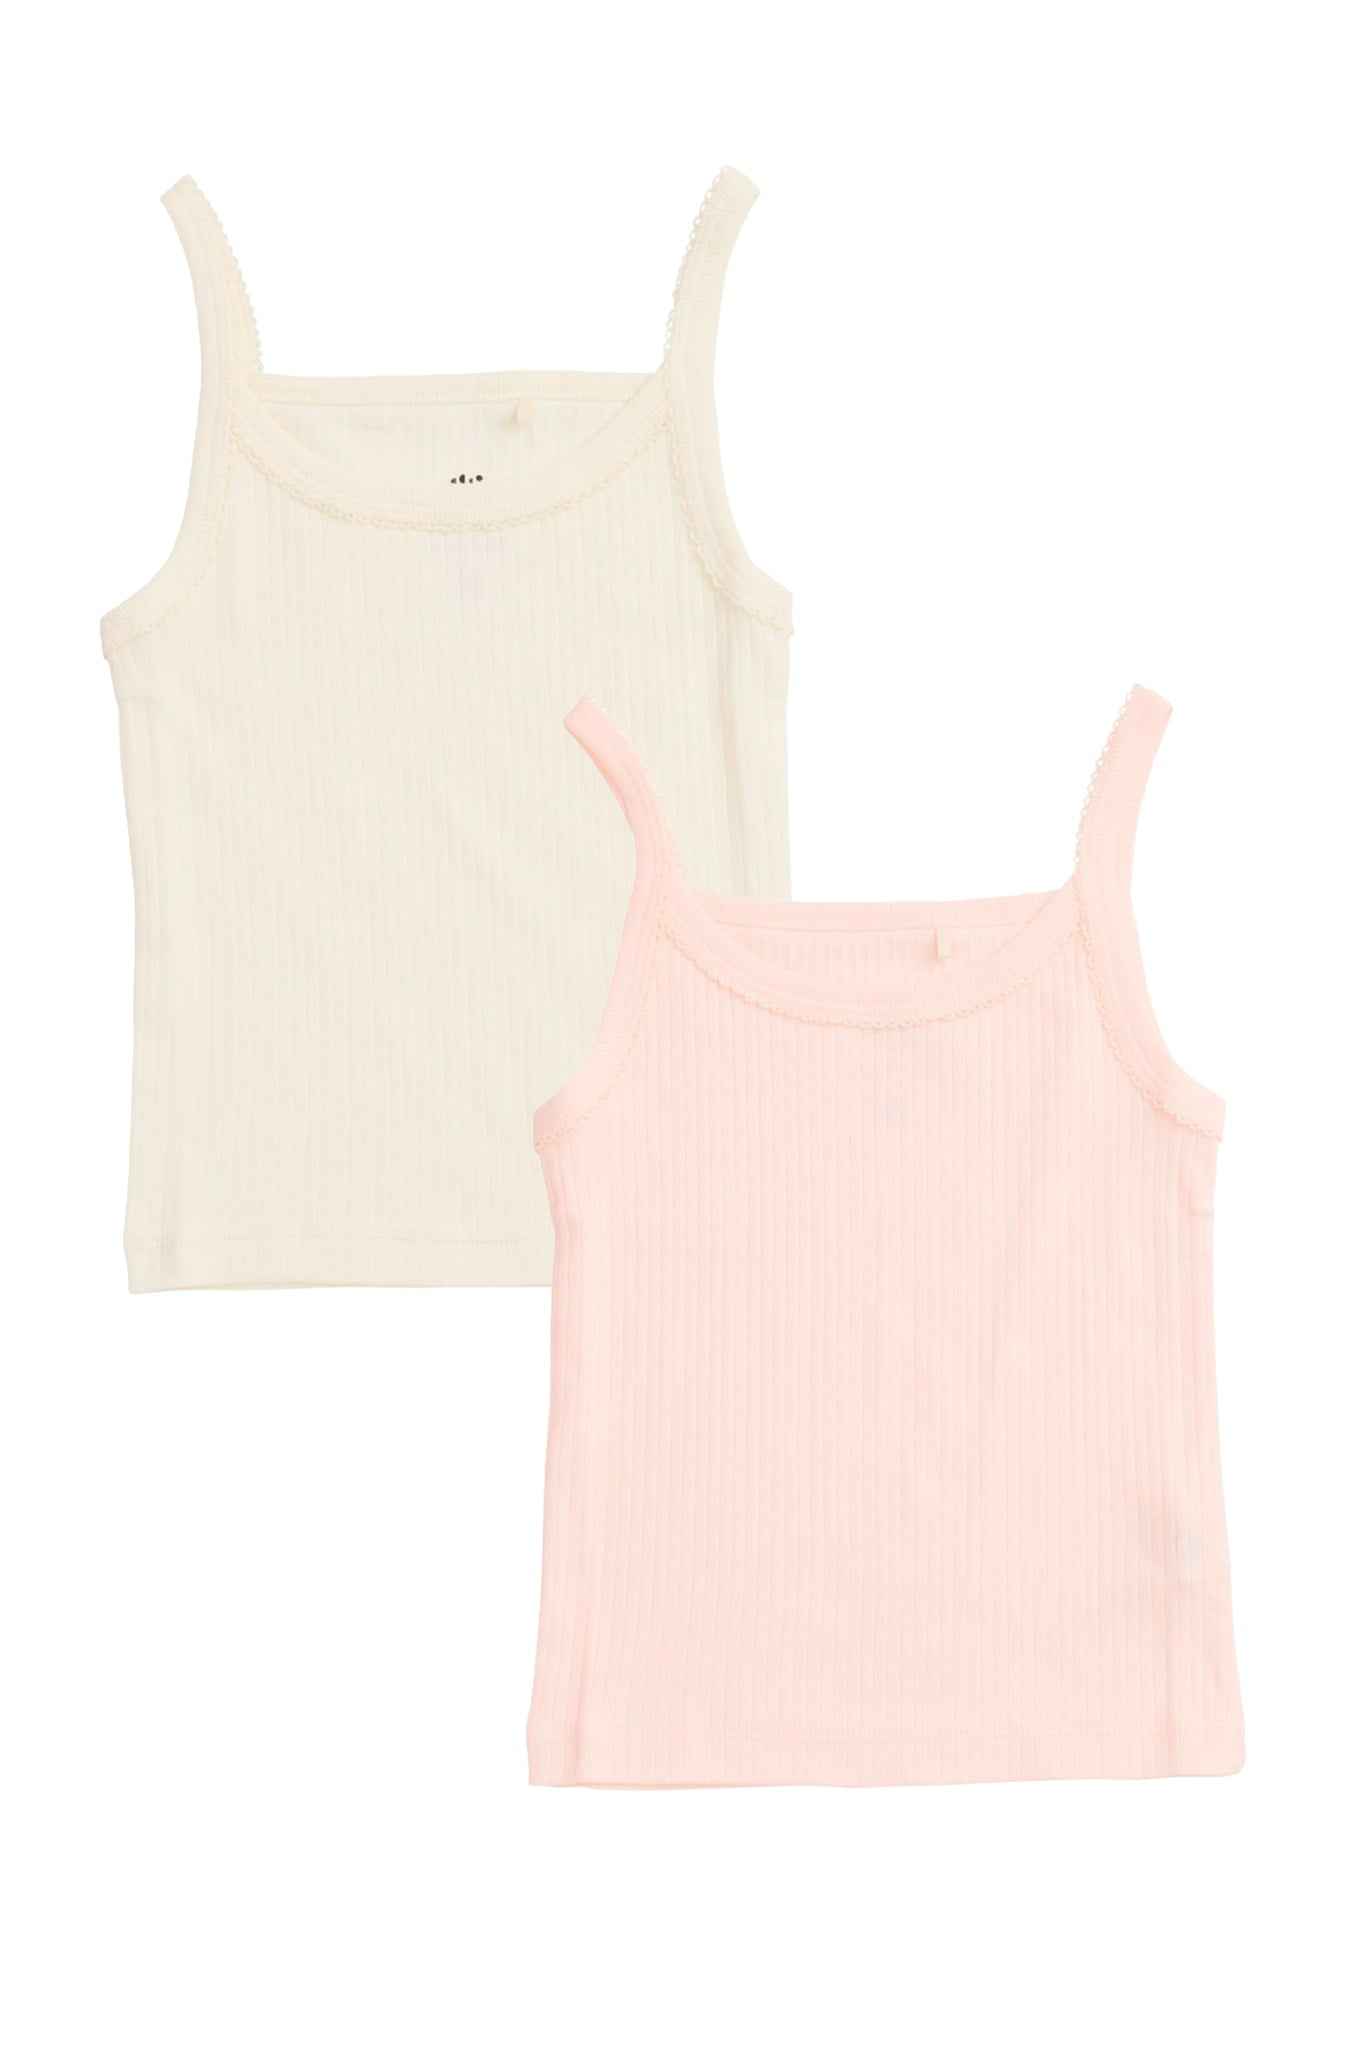 RIB JERSEY 2-PACK STRAP TOPS - SOFT PINK/ CREAM COMB.